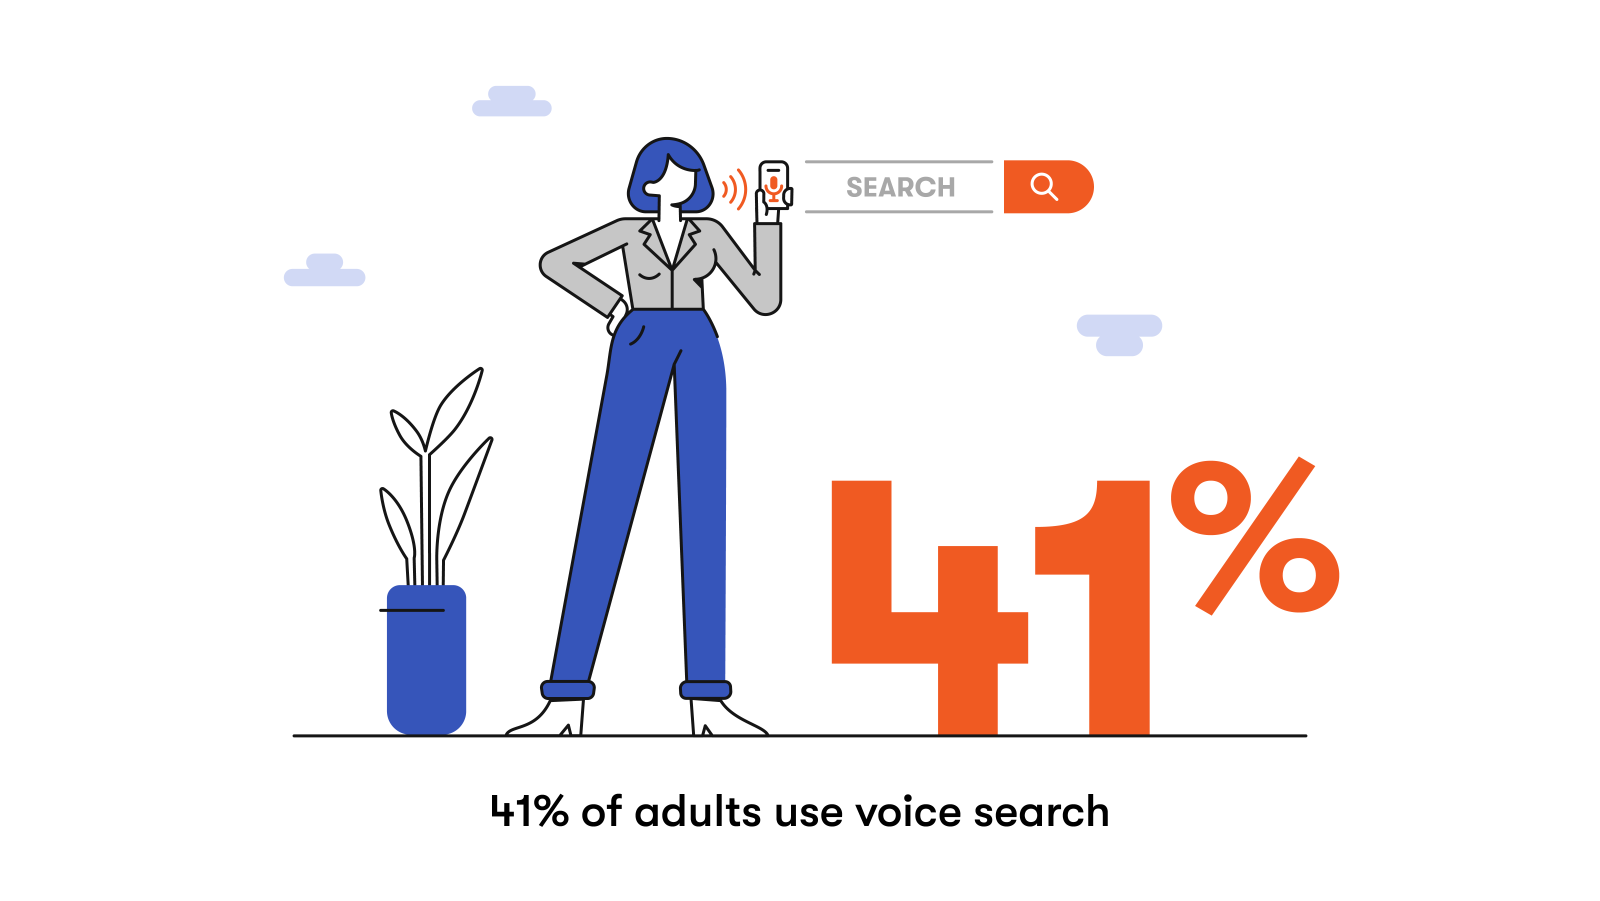 41% of adults use voice search